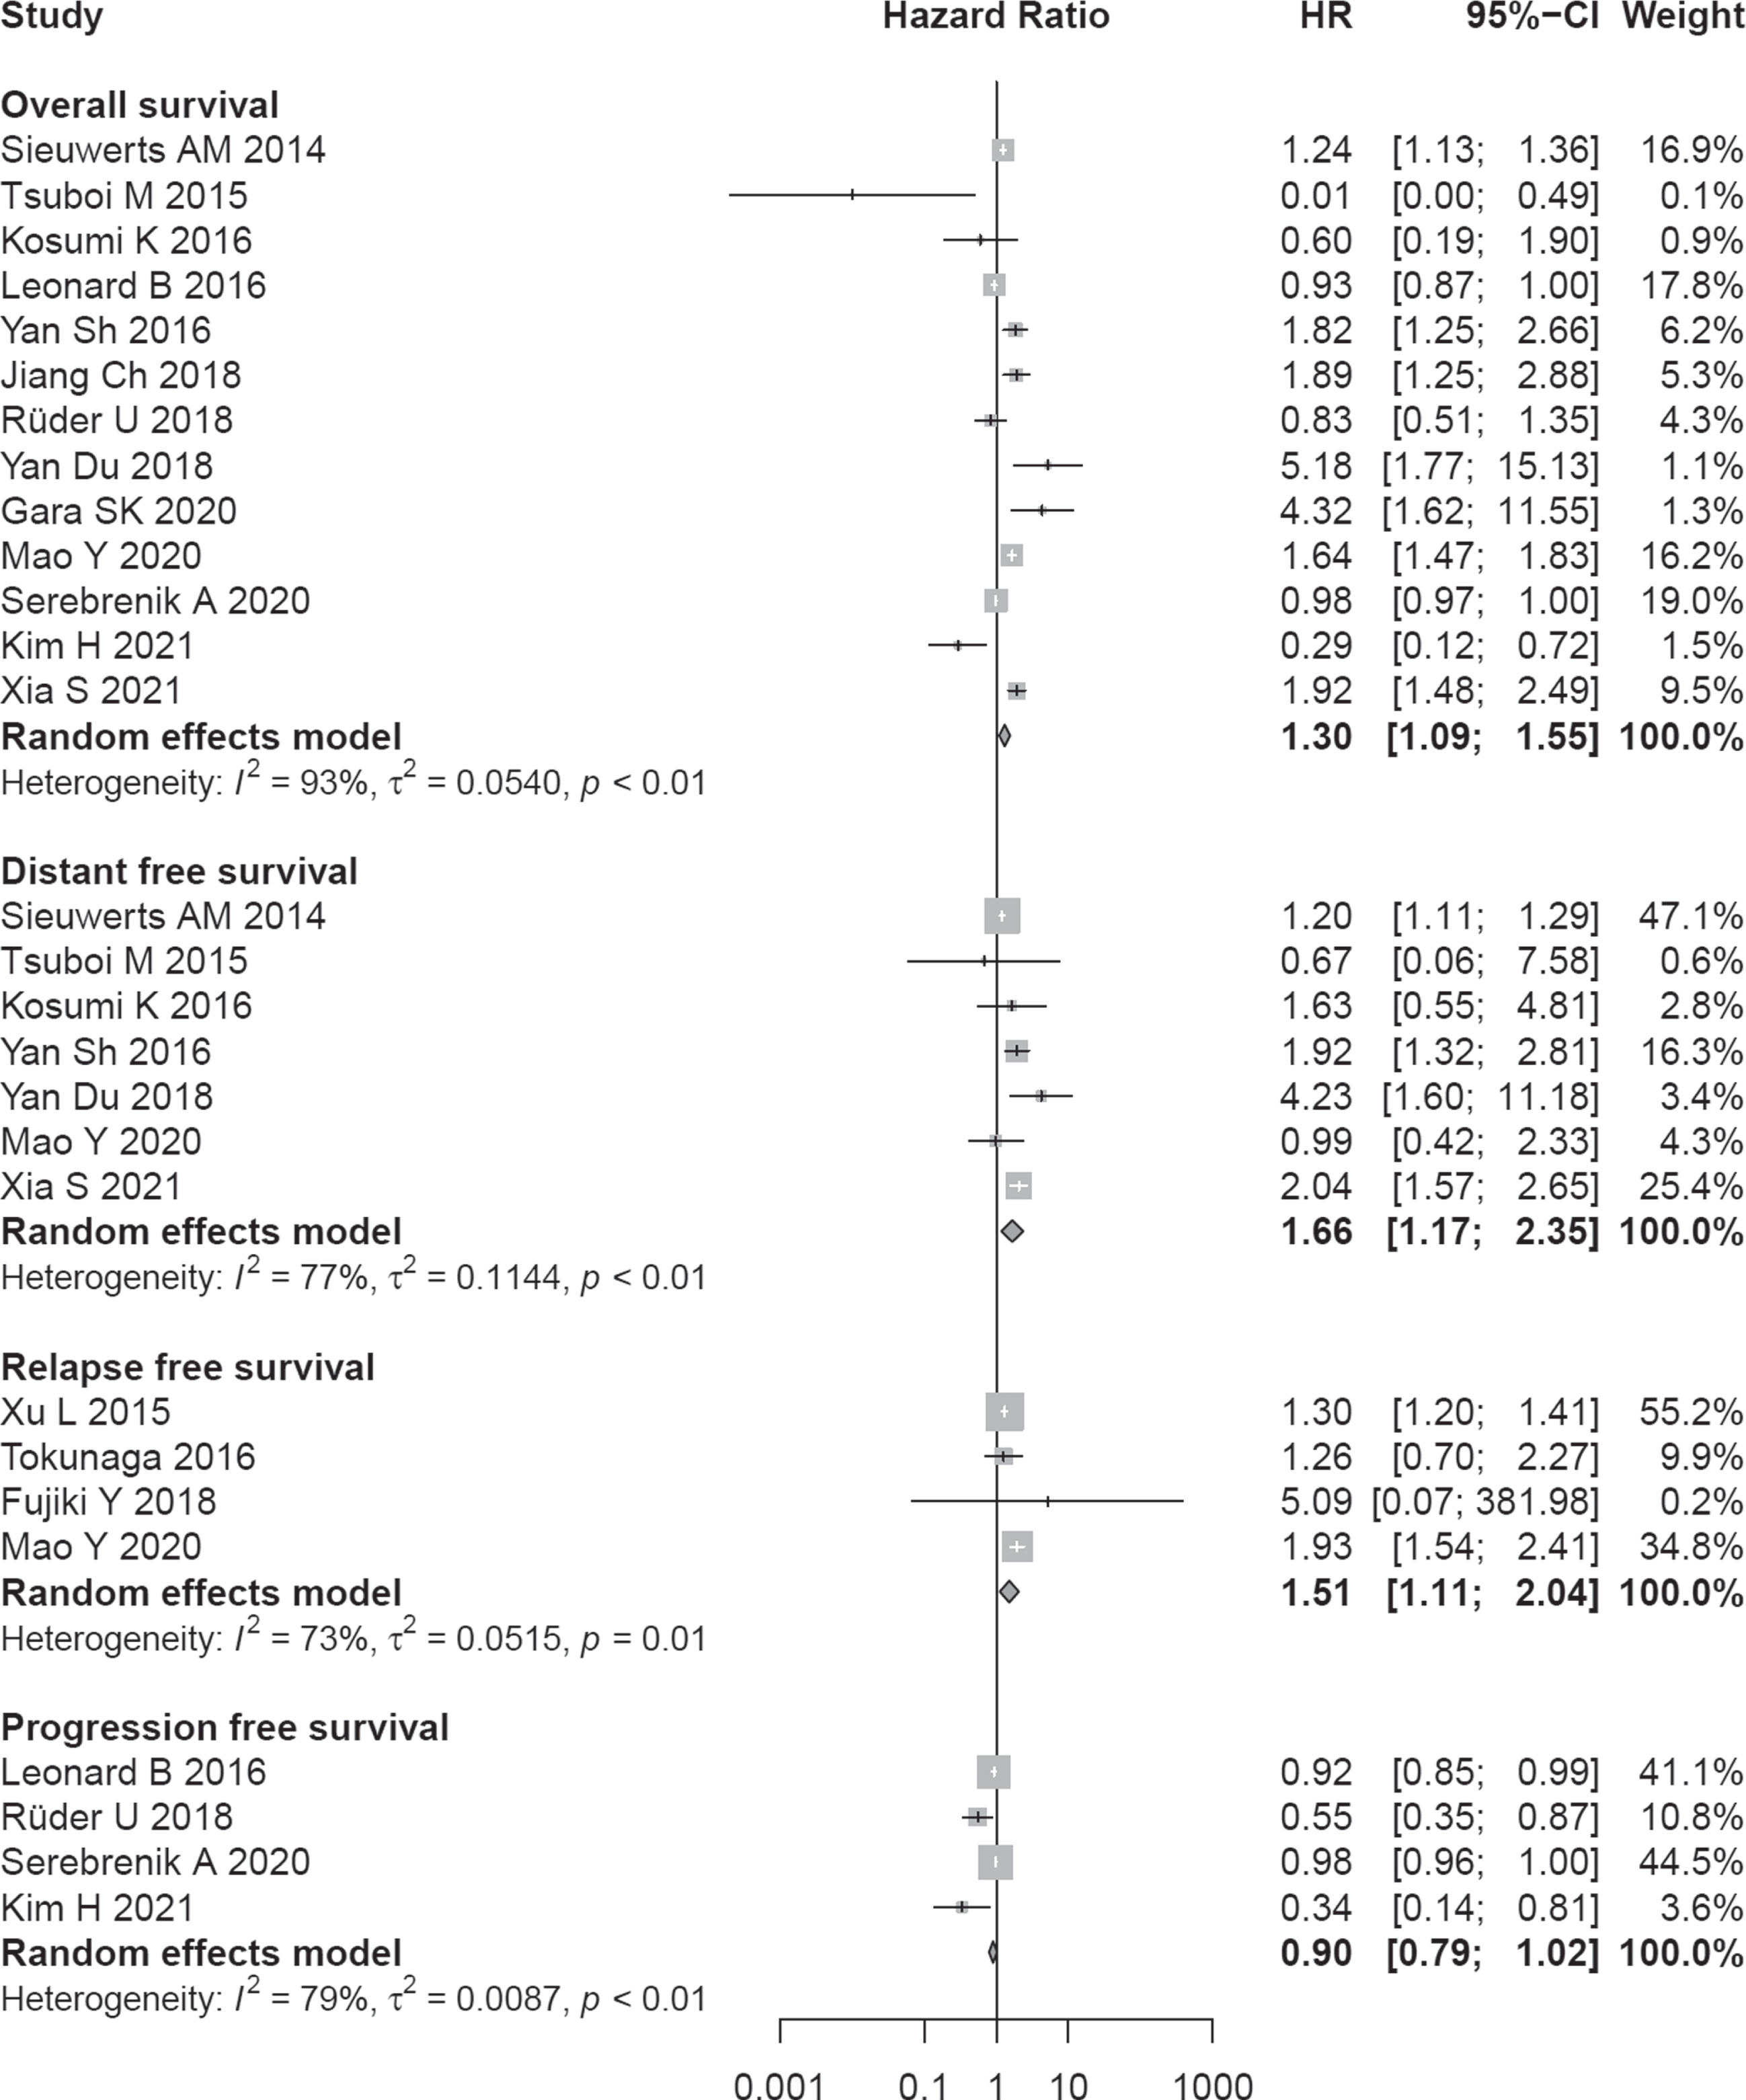 Association between A3B expression and survival outcomes.